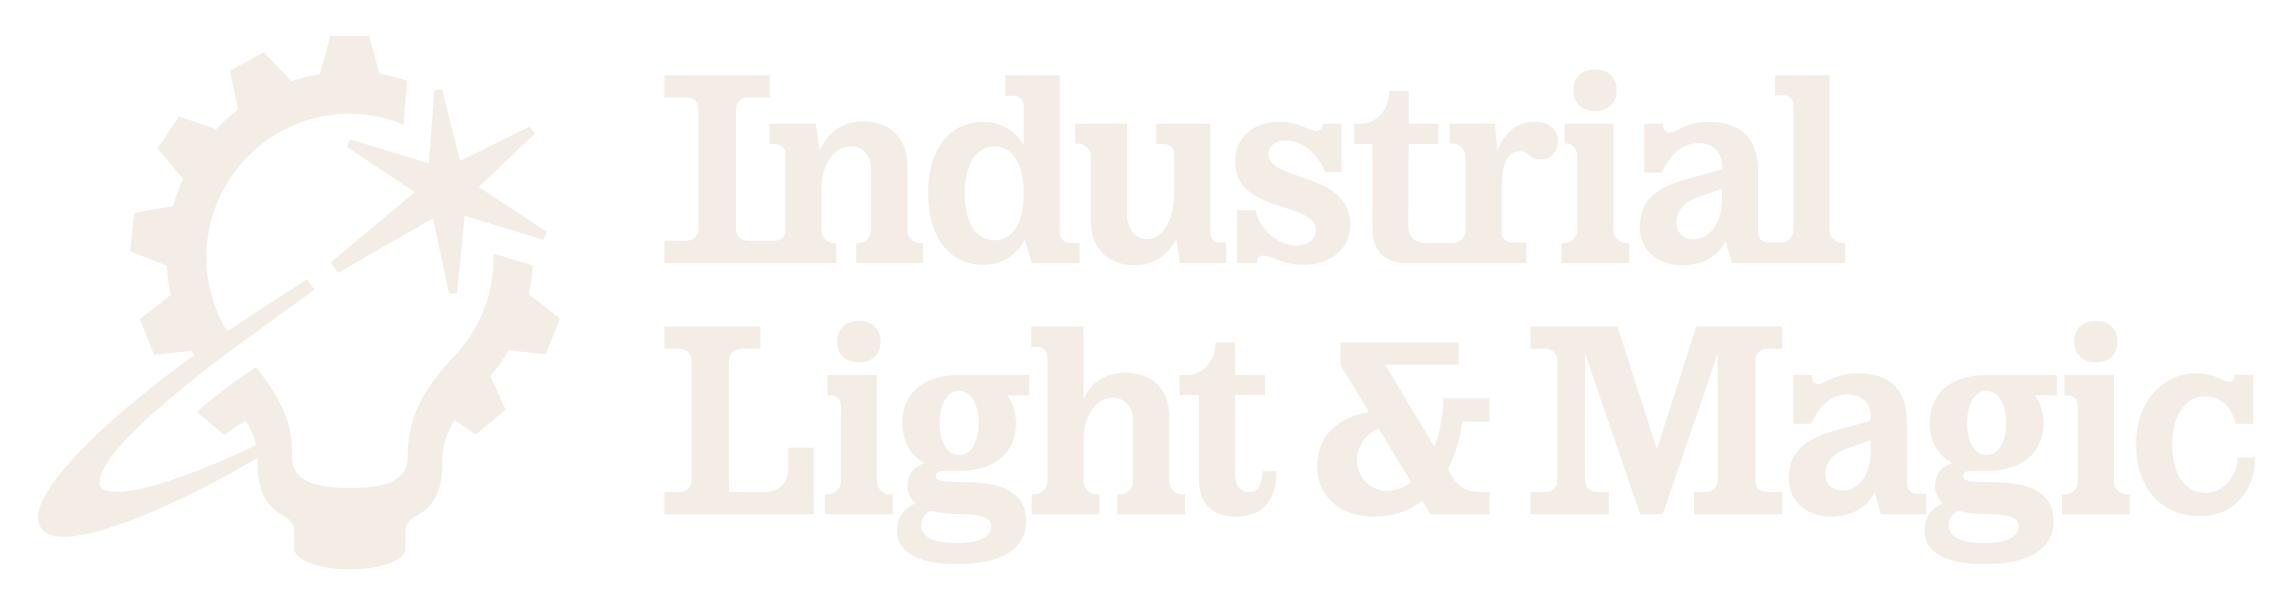 Industrial Light and Magic logo redesign by Hoodzpah